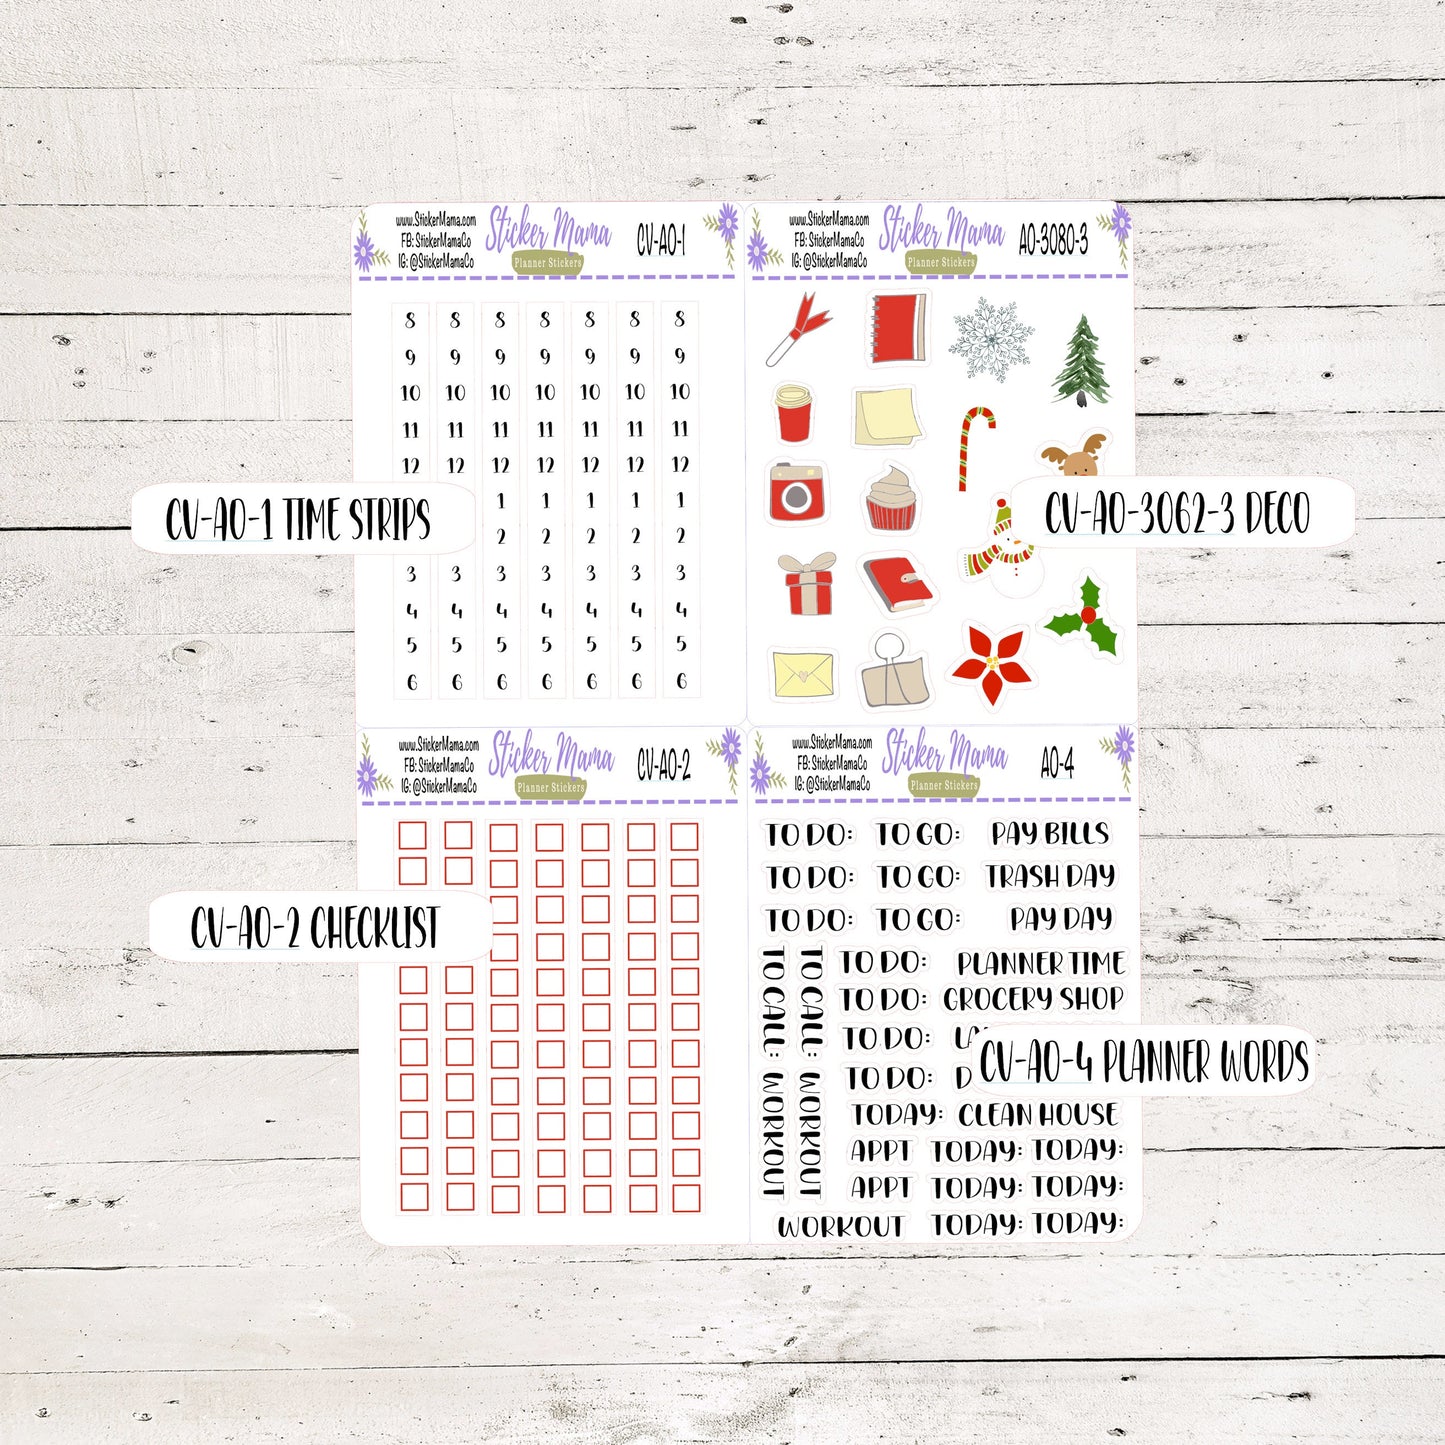 3080a - NEW COMPACT VERTICAL Traditional Christmas 2 - Weekly Kit - Planner Stickers - Erin Condren Compact Vertical Weekly Kit